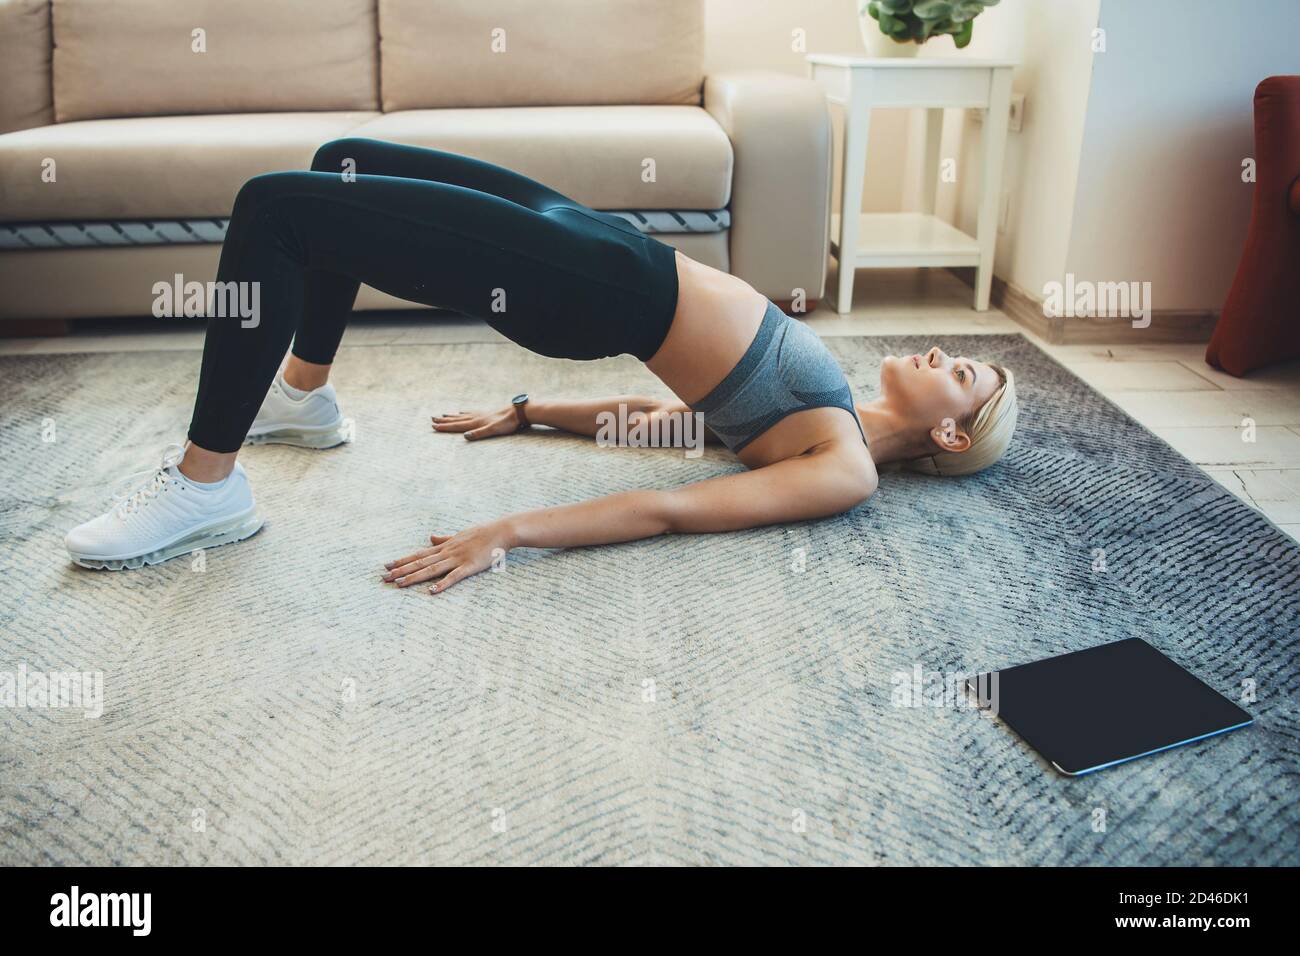 Caucasian woman in sportswear is planking during a digital fitness session at home using a tablet Stock Photo